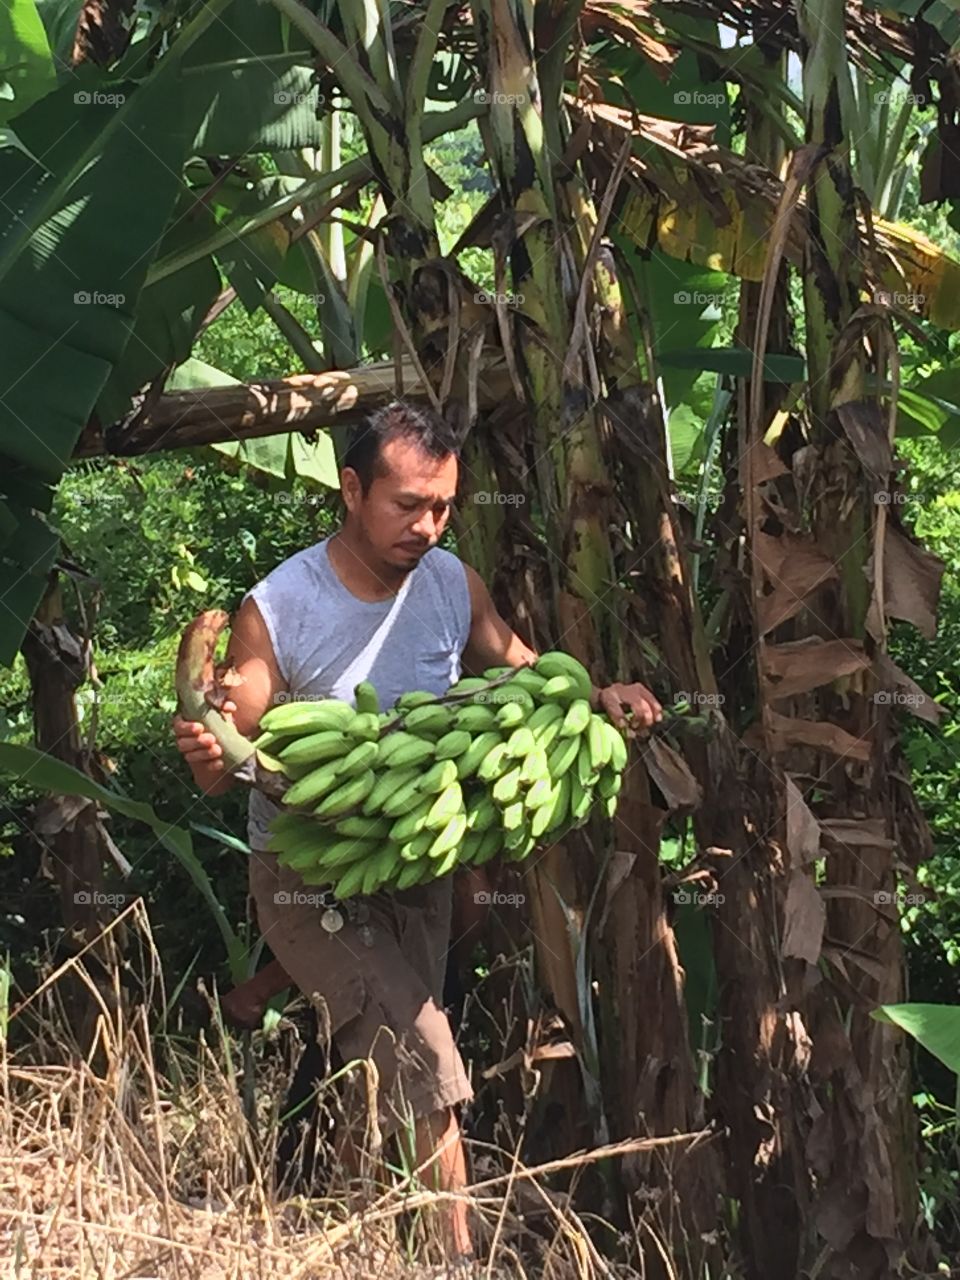 Man holding banana bunches in hand